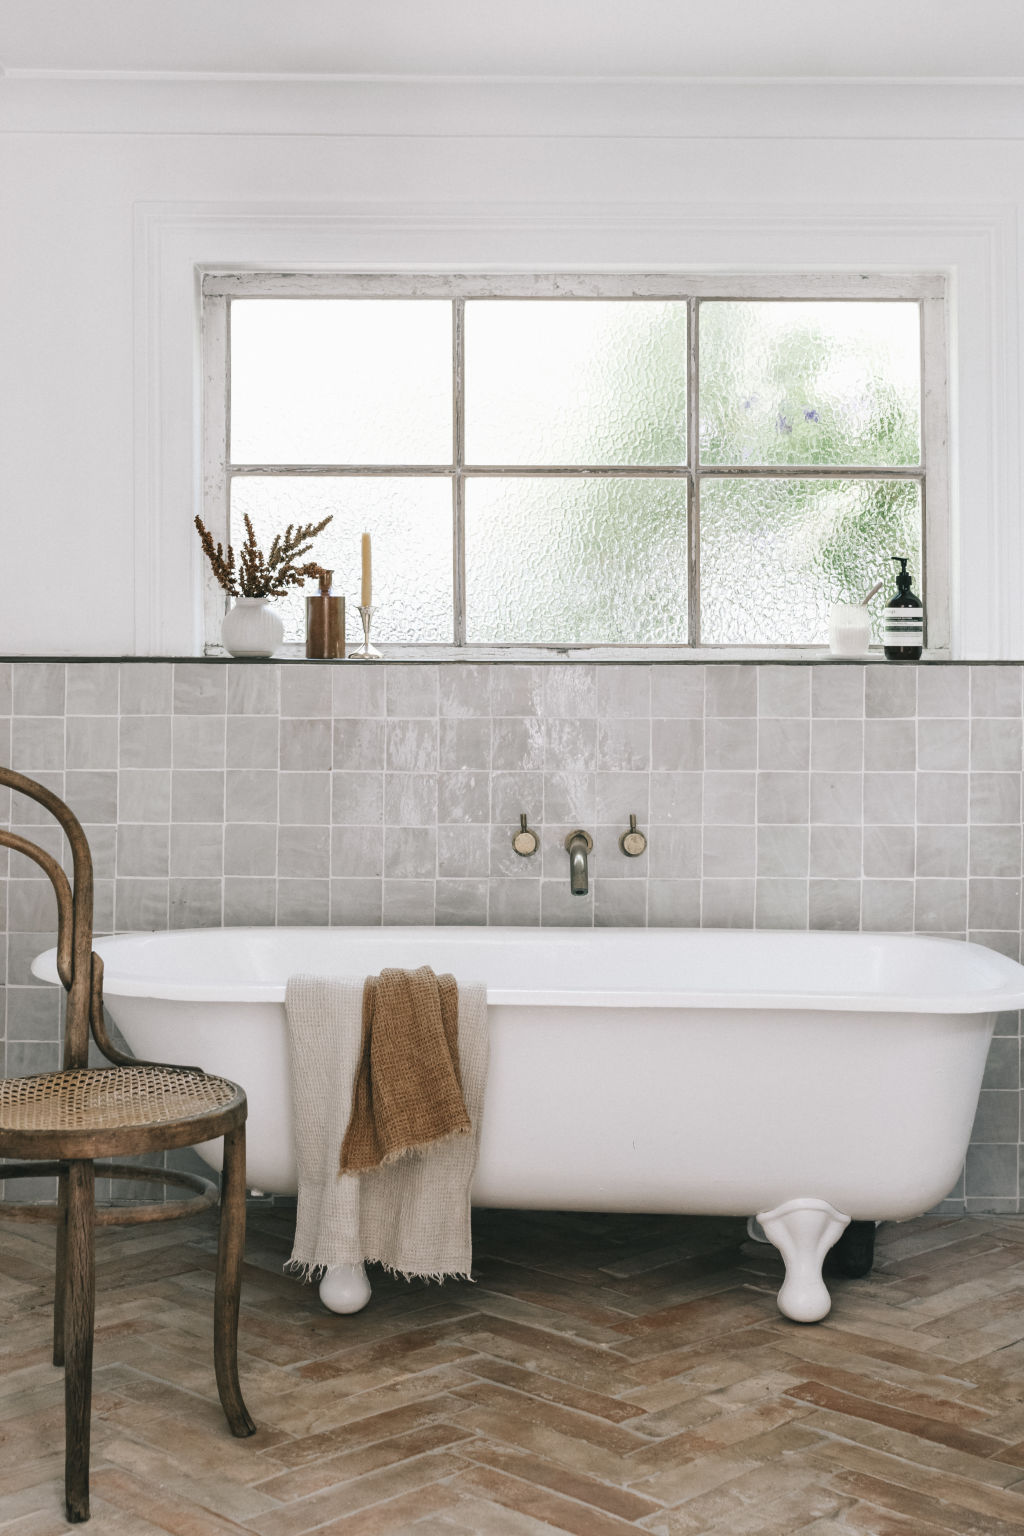 'A standout aspect of the renovation is the bathroom and laundry transformation ... the restored claw-foot bathtub is a focal point,' Jemima says. Photo: Natalie Salloum